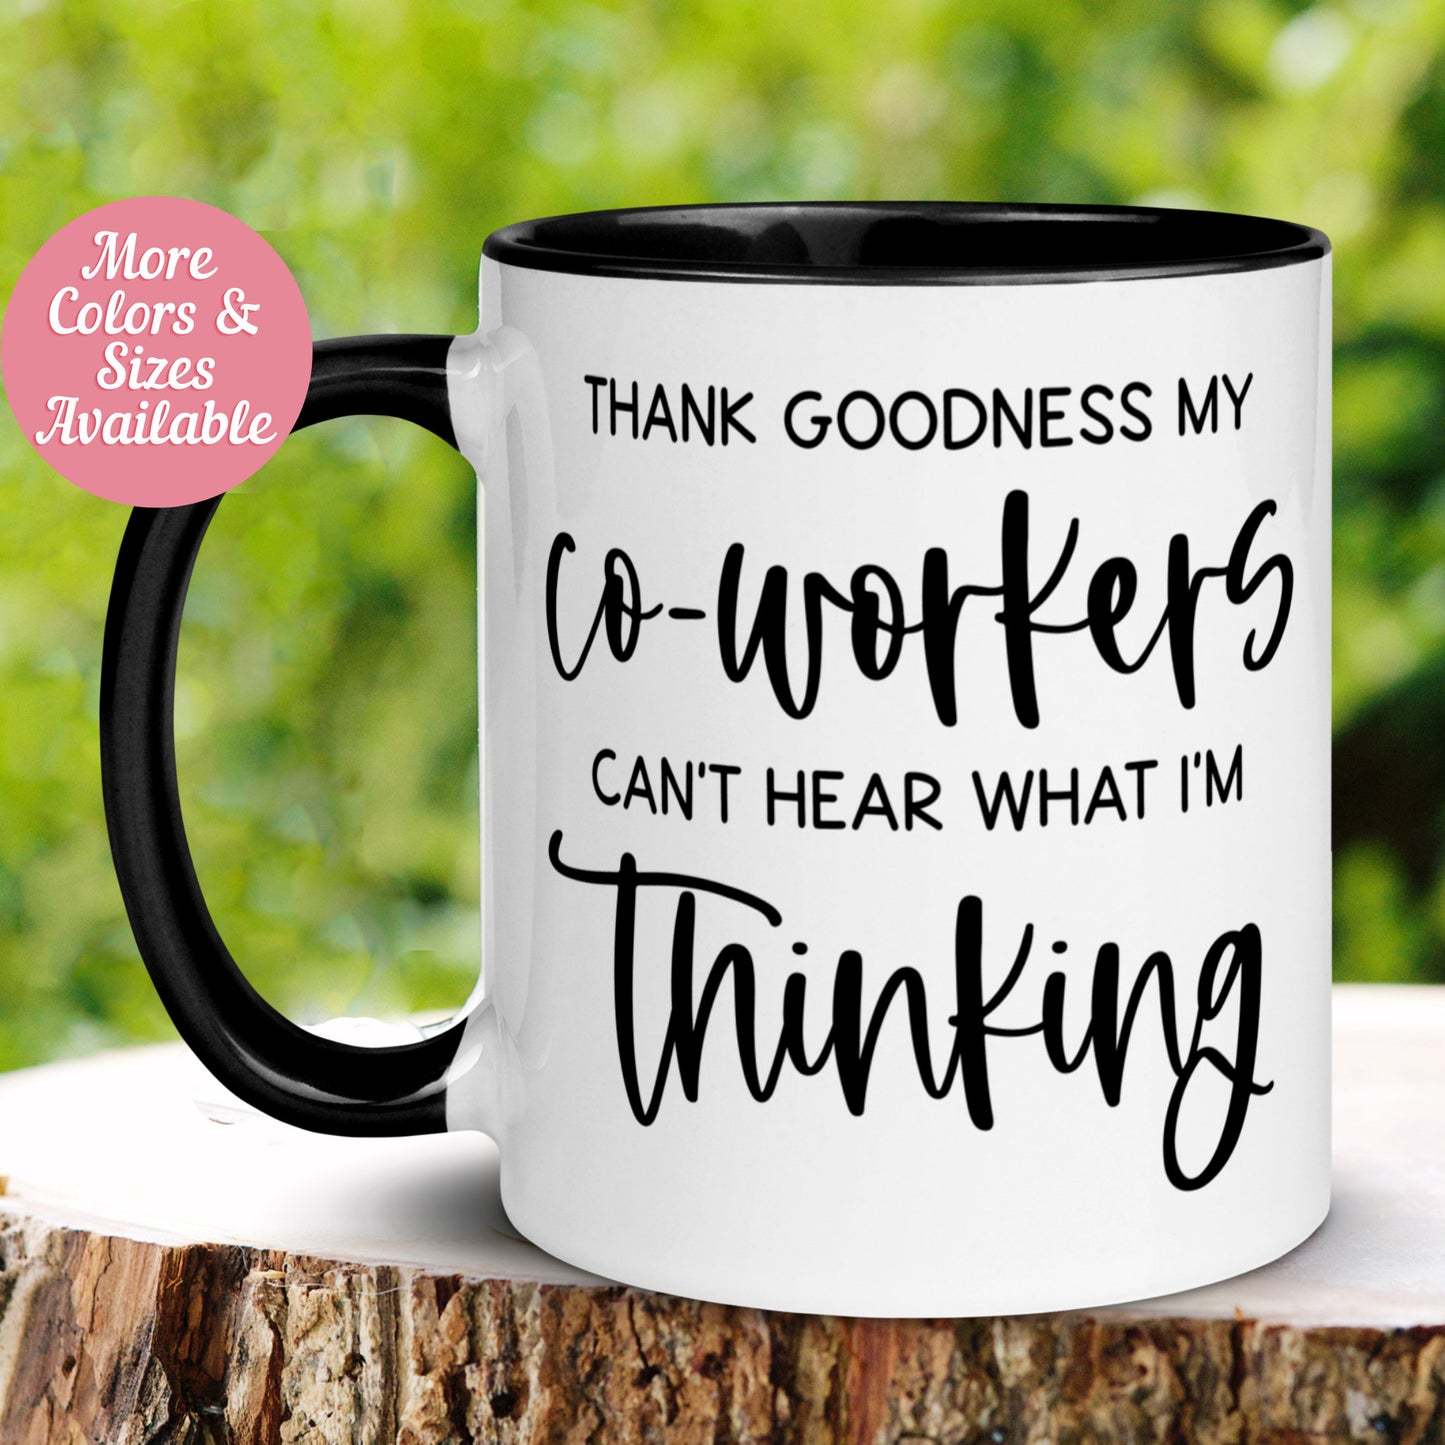 Mug for Boss Office, Thank Goodness My Co-Workers Can't Hear What I'm Thinking Mug - Zehnaria - OFFICE & WORK - Mugs